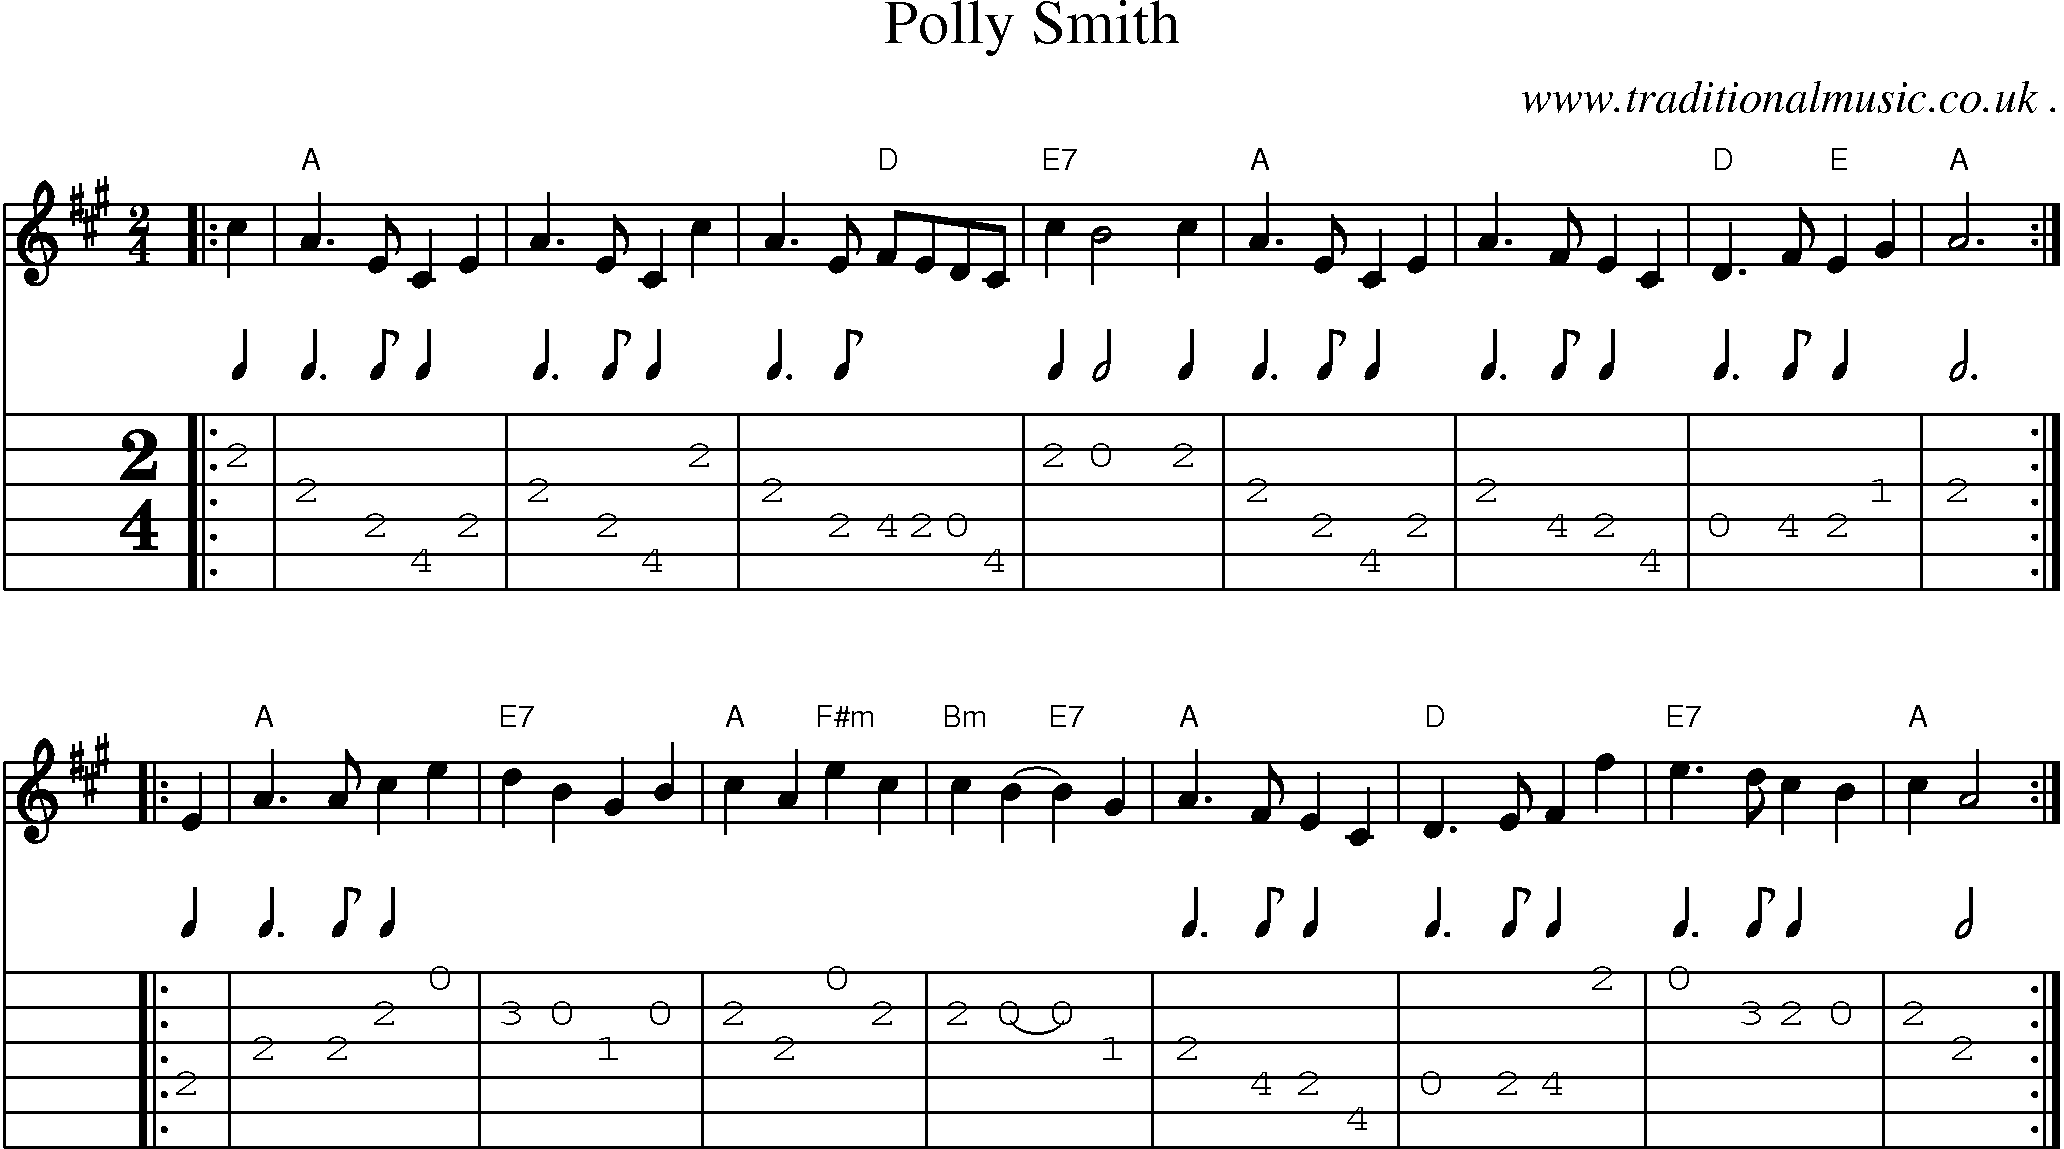 Sheet-music  score, Chords and Guitar Tabs for Polly Smith